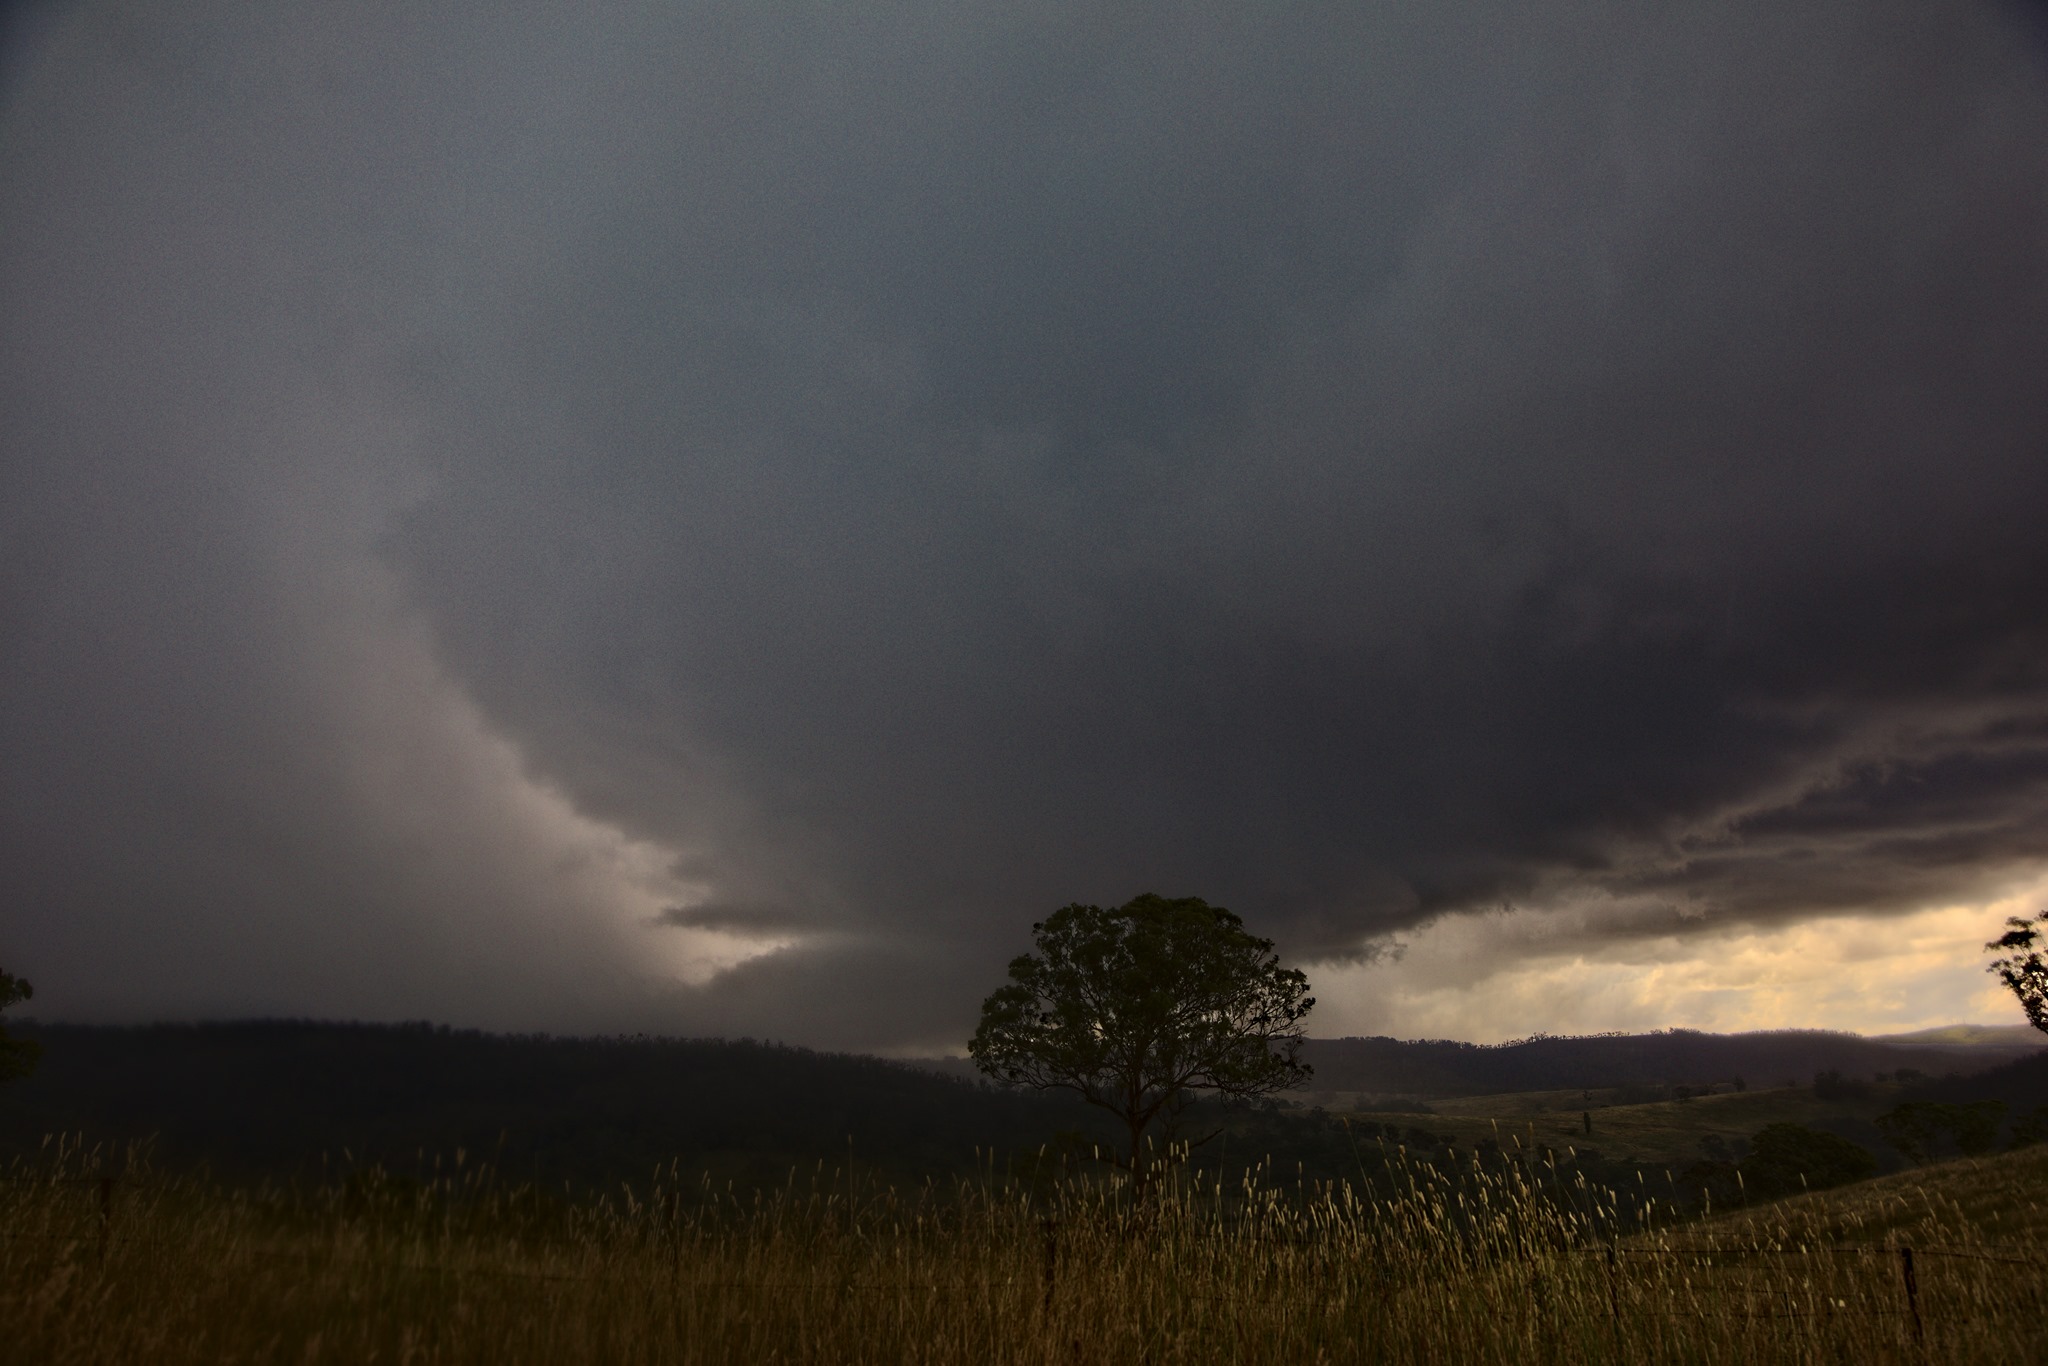 One year ago beauty

Started the day near Penrith and headed leisurely to Oberon. First storms of the day - one took shape and intensified. After gett...